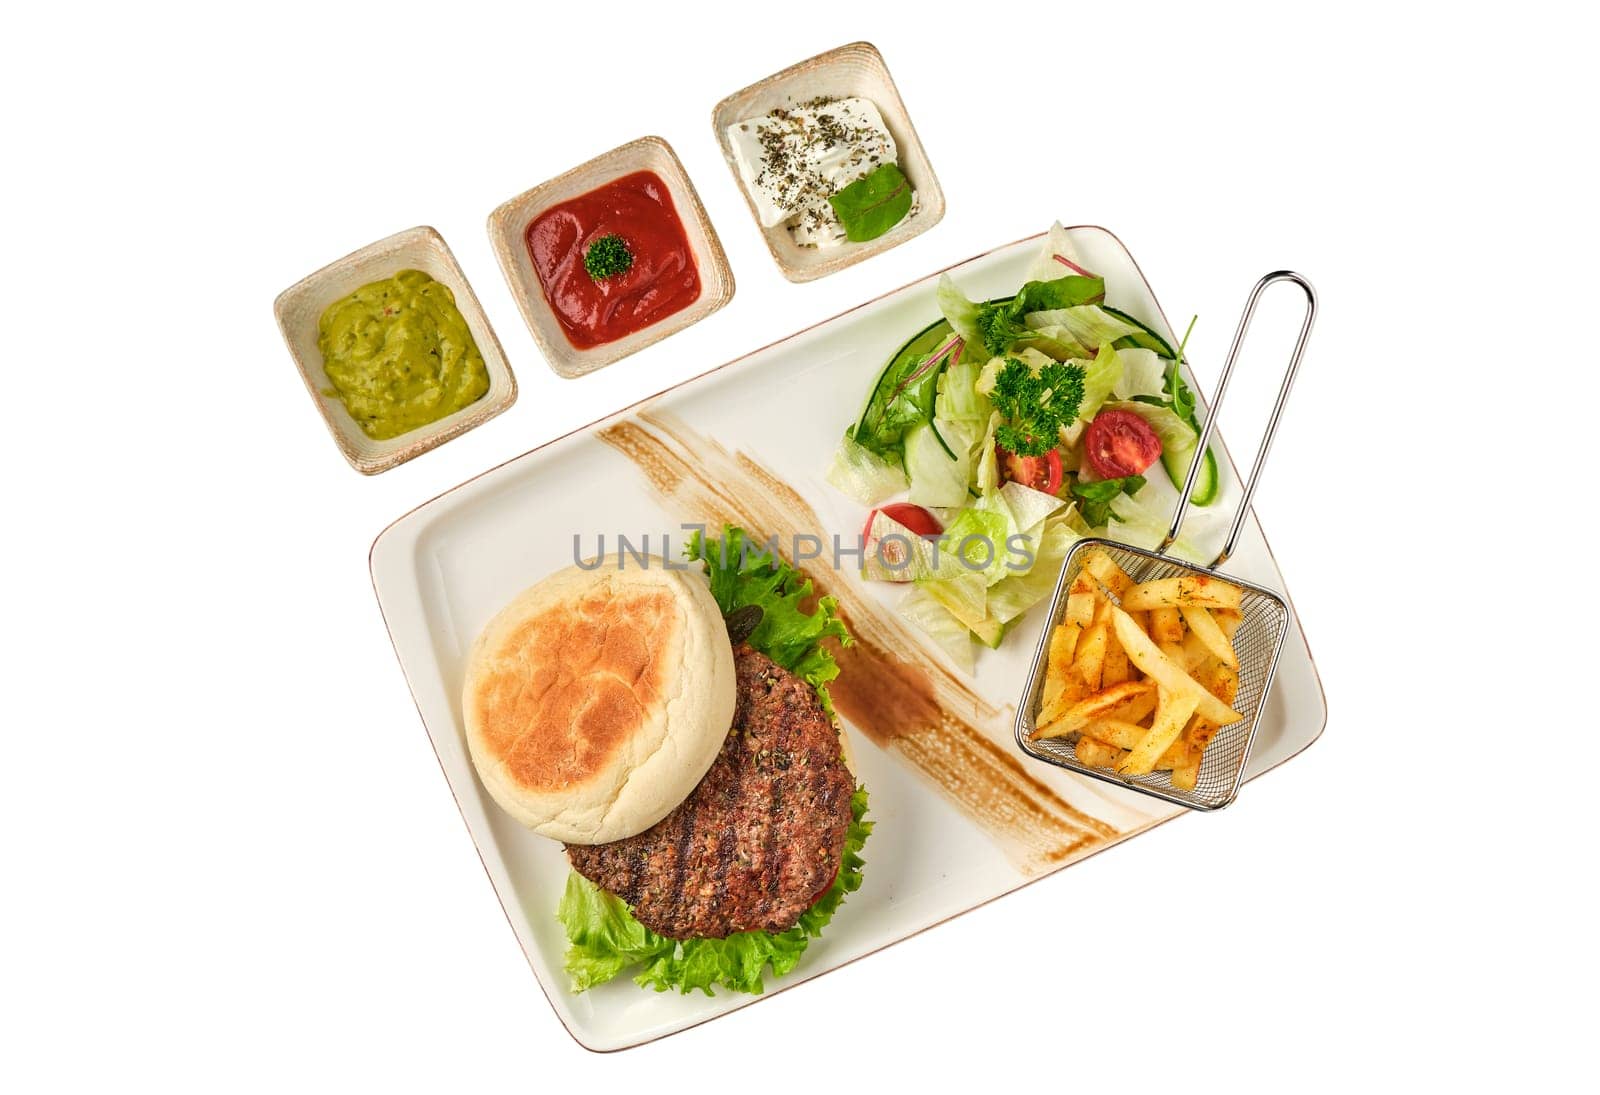 Delicious grilled  burger on white plate on white background.  with sauces, french fries and salads.